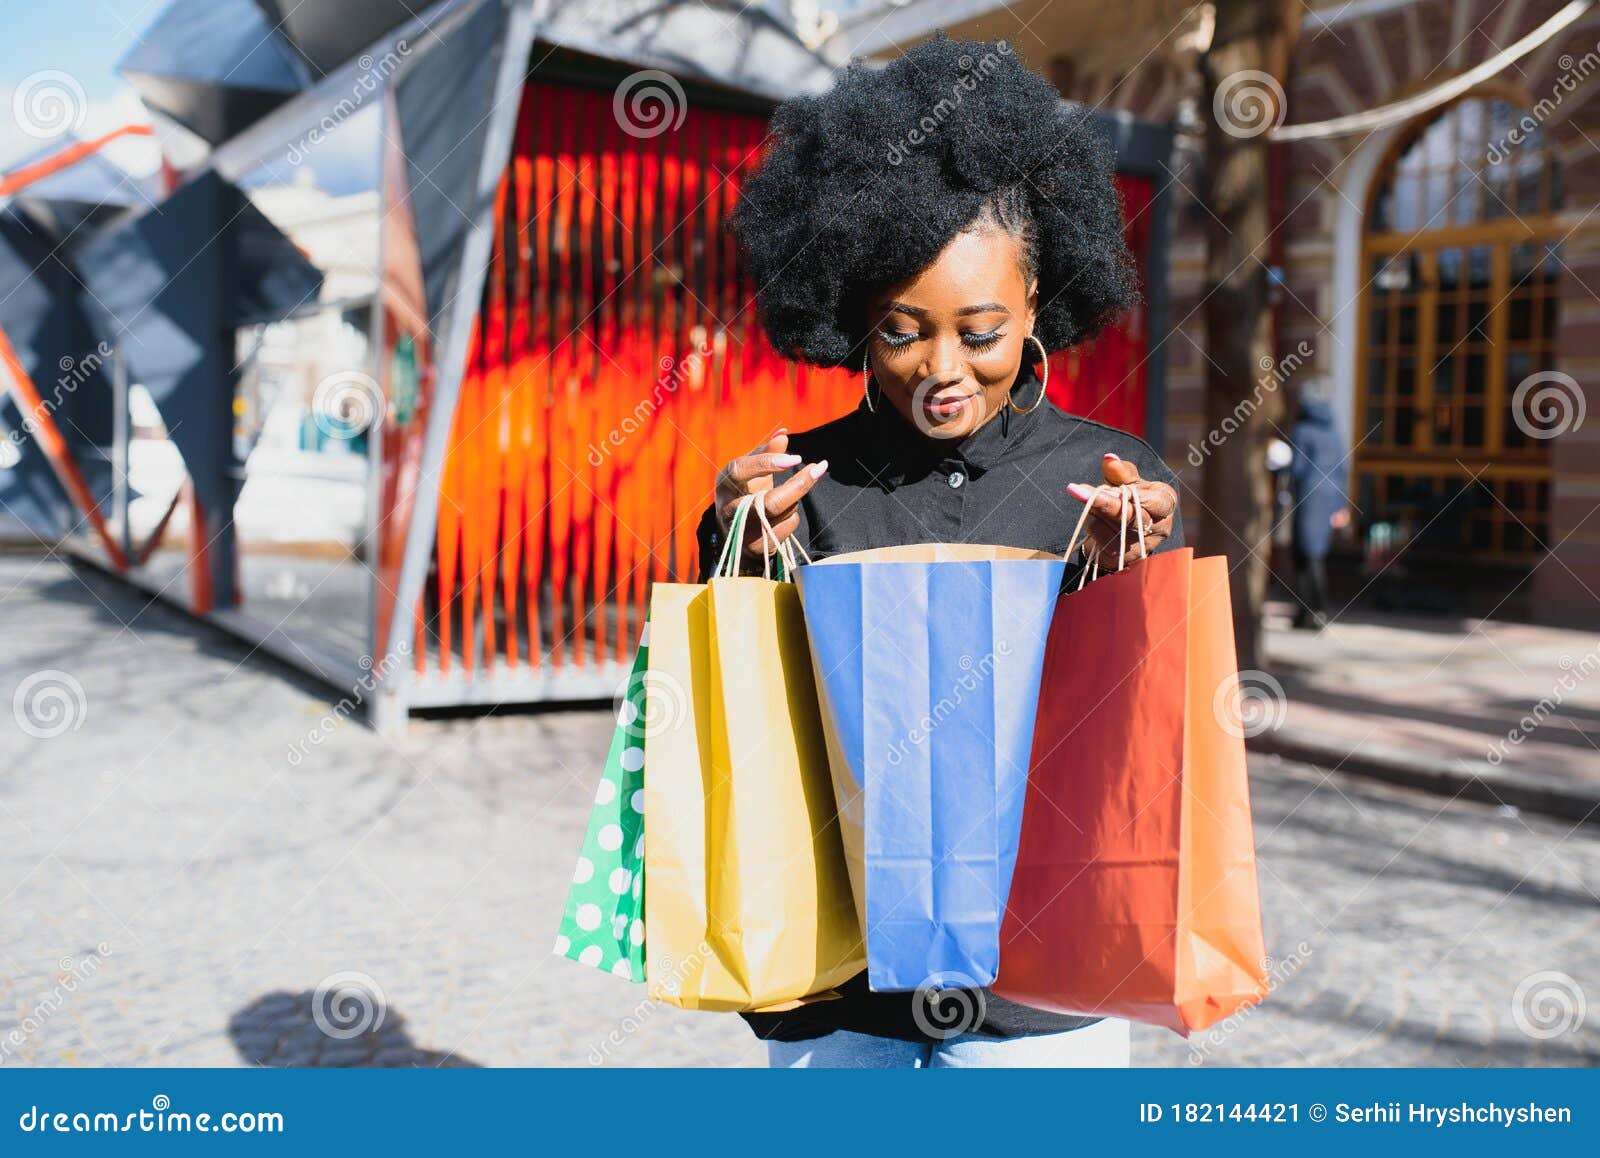 Portrait of Beautiful Young Black Woman Smiling with Shopping Bags ...